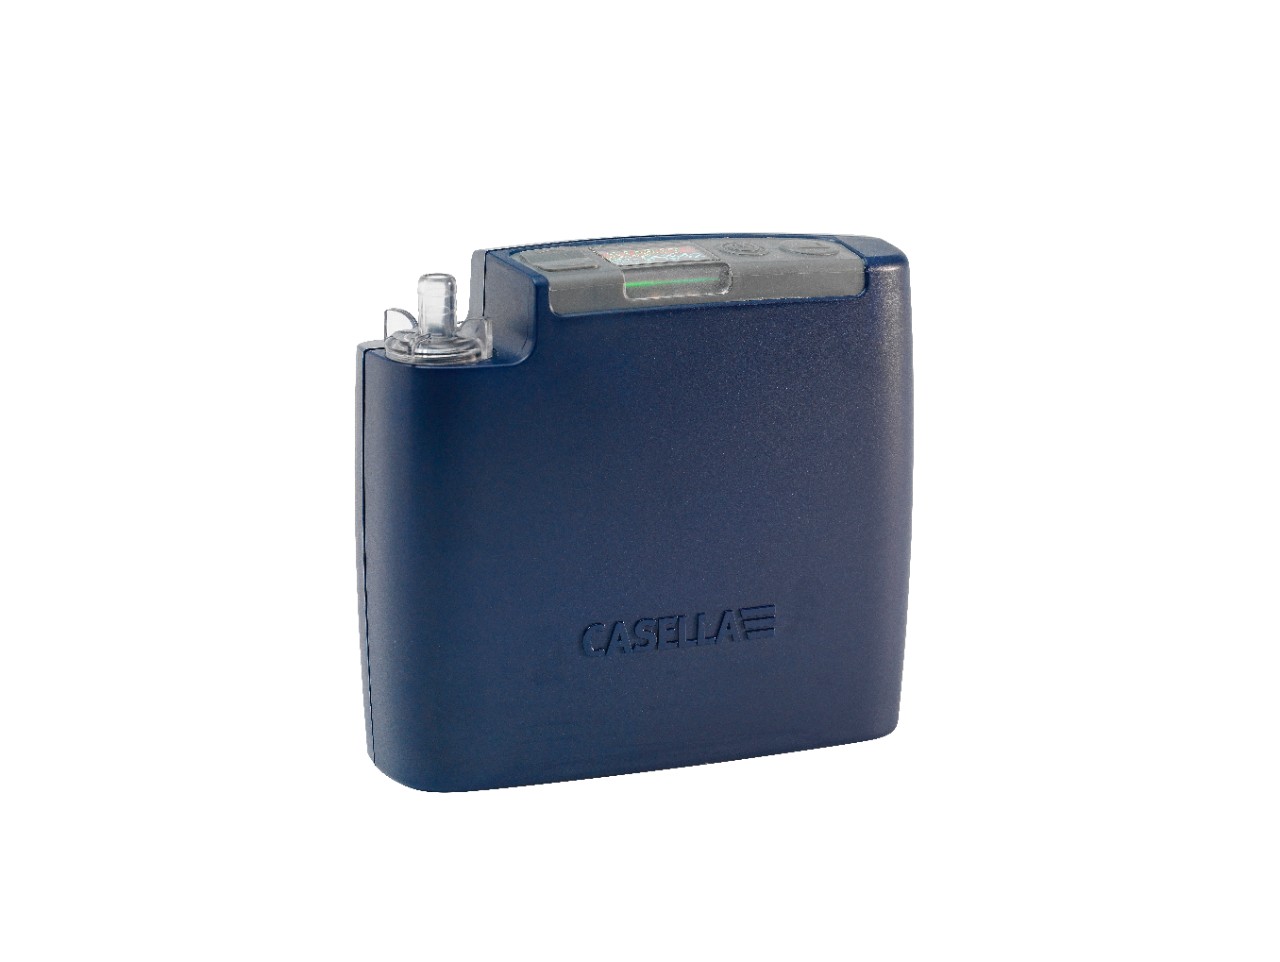 Casella's personal air sampling pump for airborne contaminants that can be damaging to health. Monitoring solution for dusts.